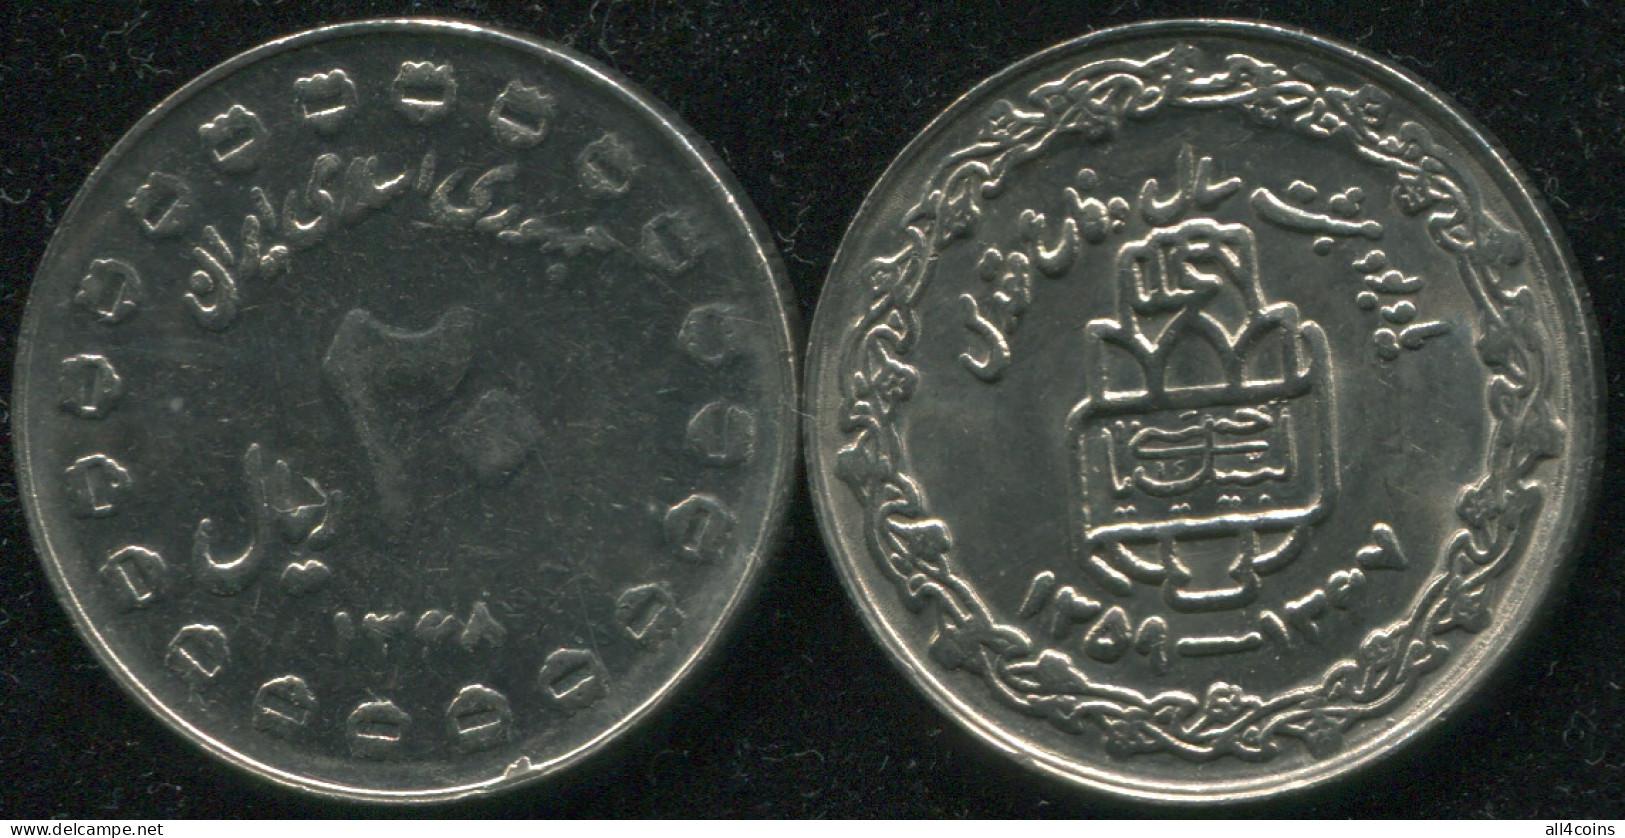 Persia. 20 Rials. 1989 (Coin KM#1254. Unc) 8 Years Of Sacred Defense - Irán